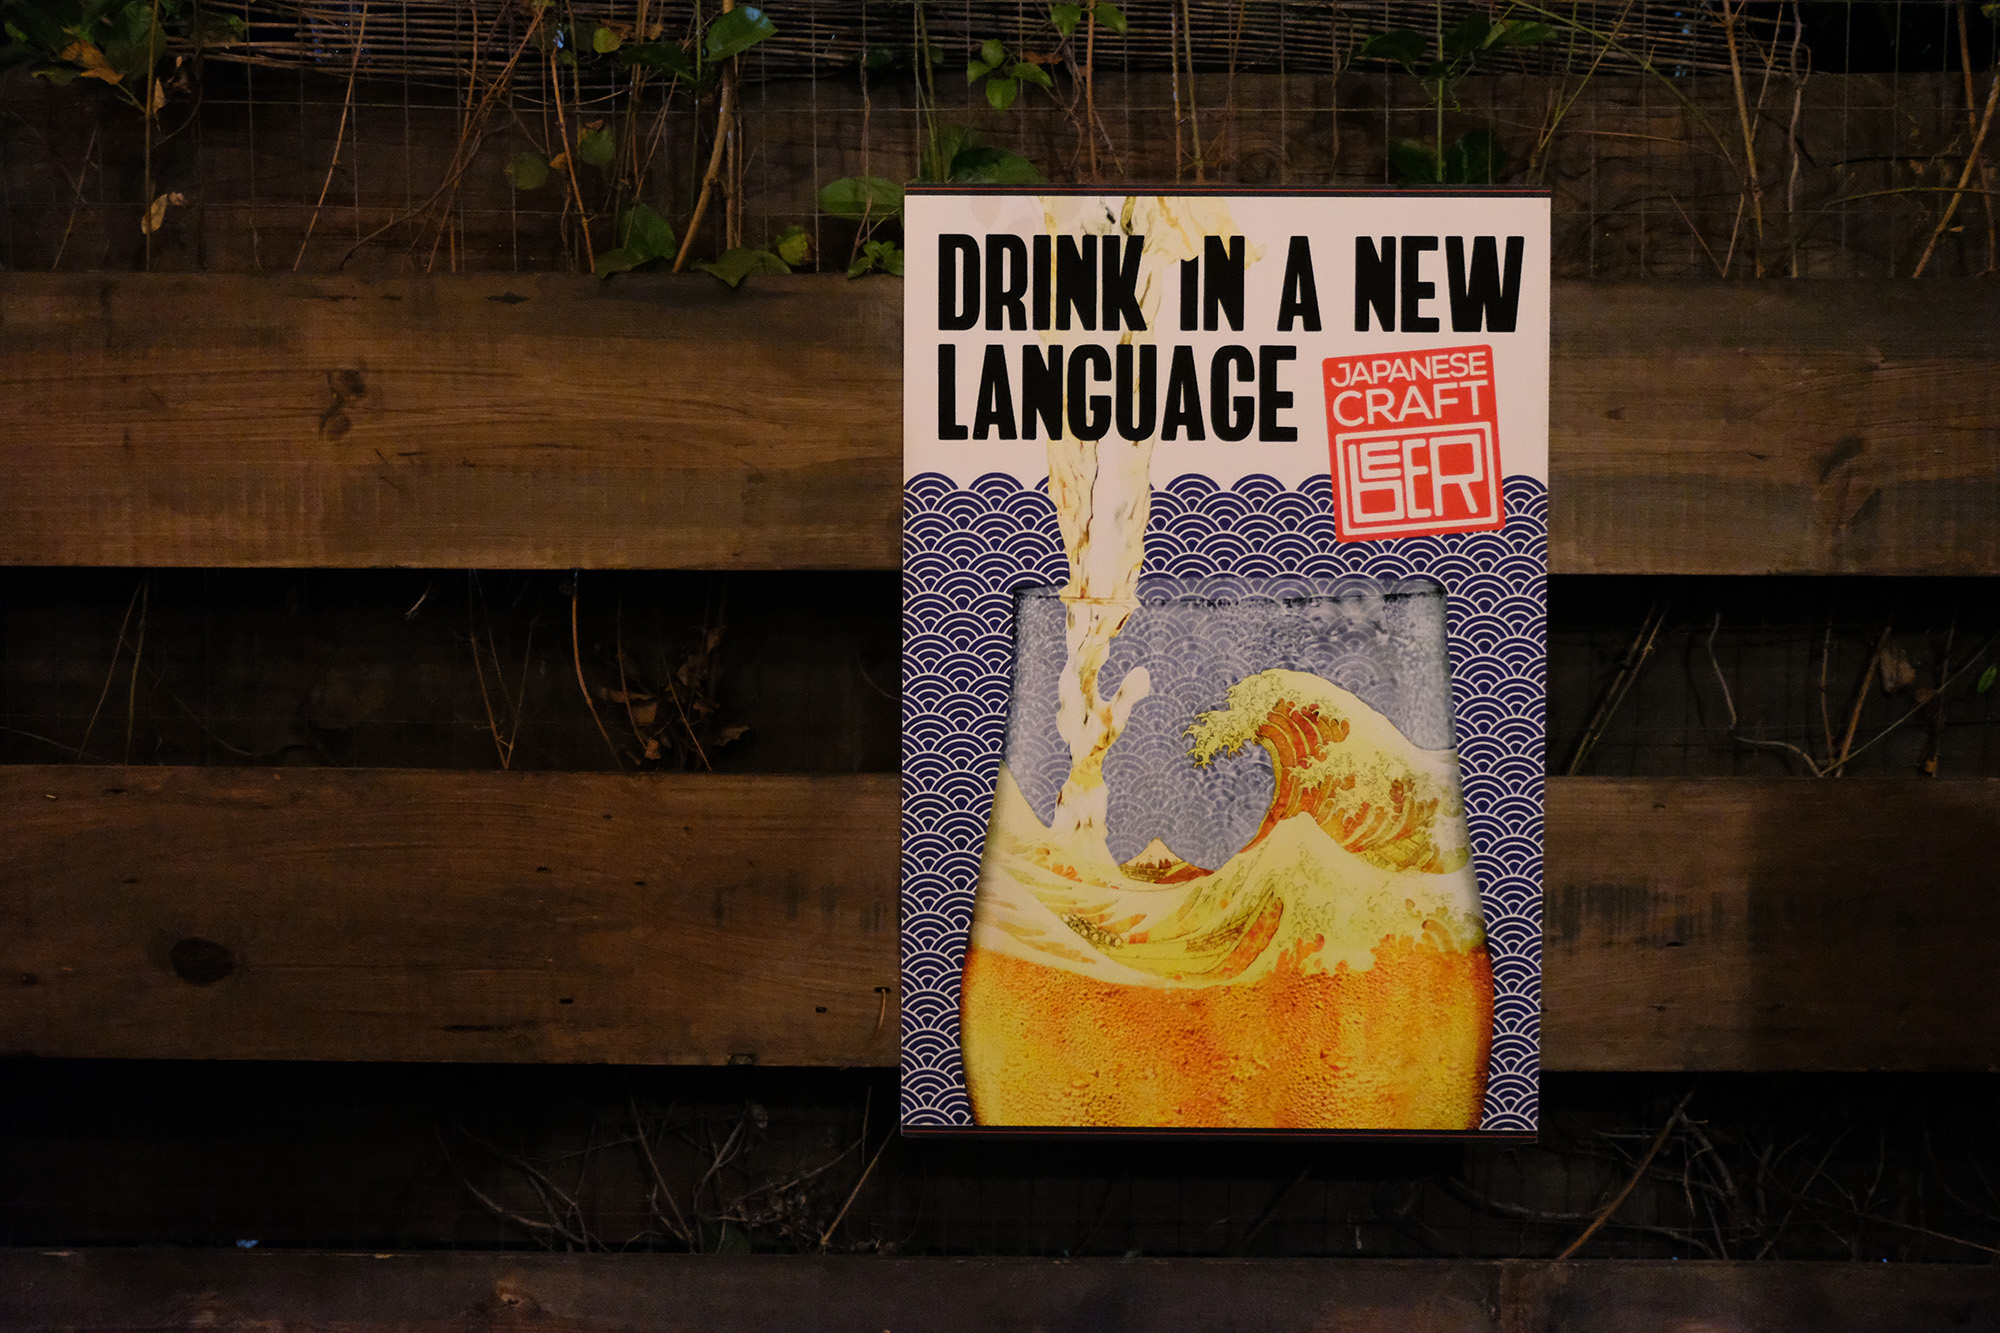 DRINK IN A NEW LANGUAGE